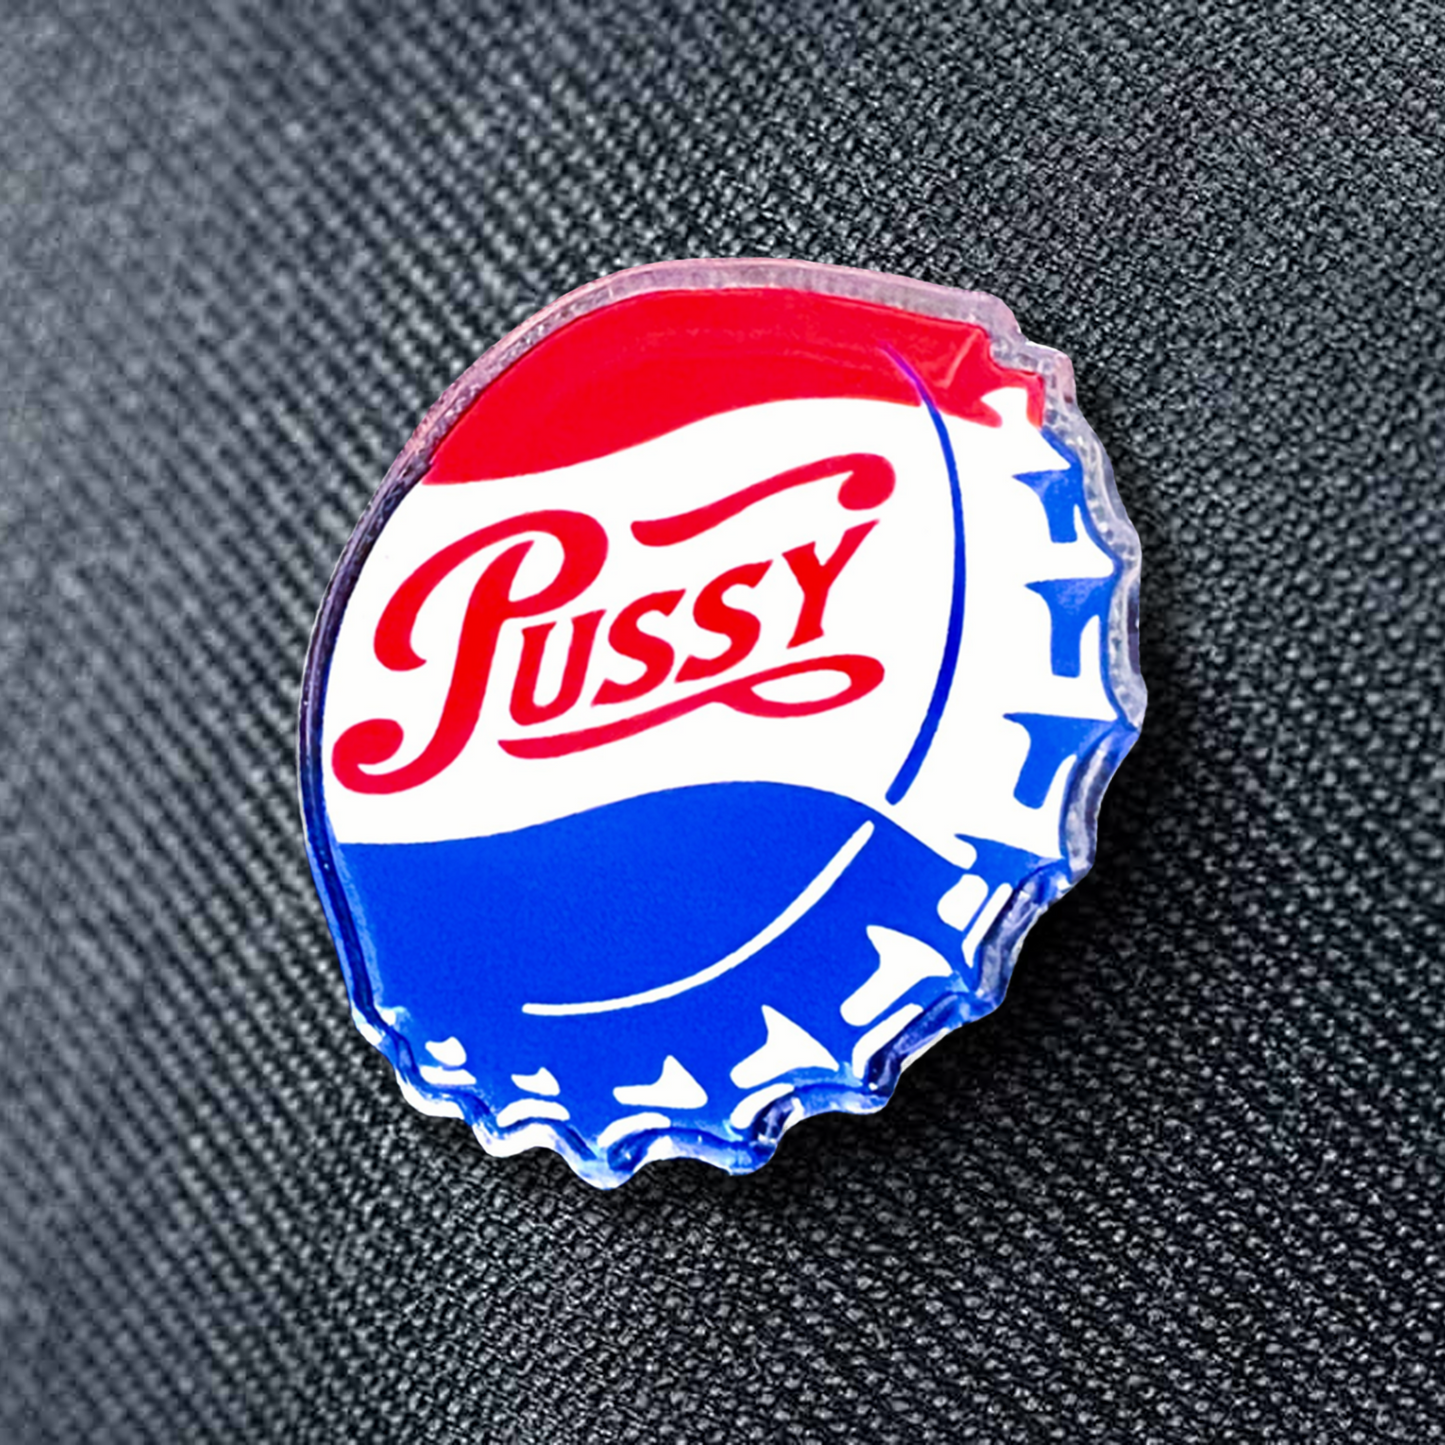 Pussy Cola LDR Inspired Acrylic Pin